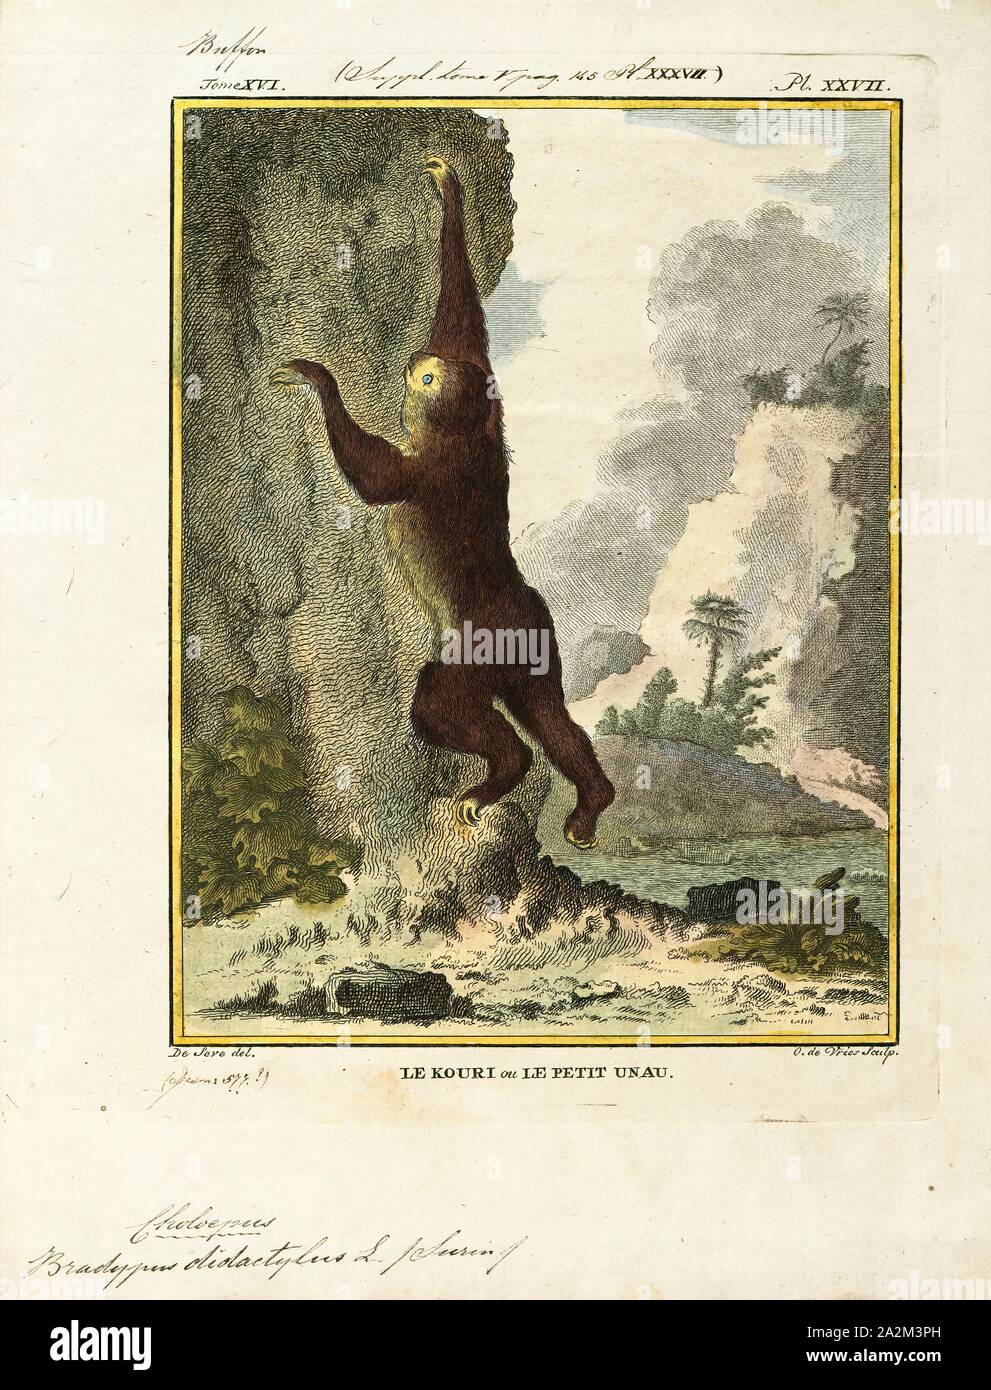 Bradypus didactylus, Print, Linnaeus's two-toed sloth (Choloepus didactylus), also known as the southern two-toed sloth, unau, or Linne's two-toed sloth is a species of sloth from South America, found in Venezuela, the Guyanas, Colombia, Ecuador, Peru, and Brazil north of the Amazon River. There is now evidence suggesting the species' range expands into Bolivia., 1700-1880 Stock Photo